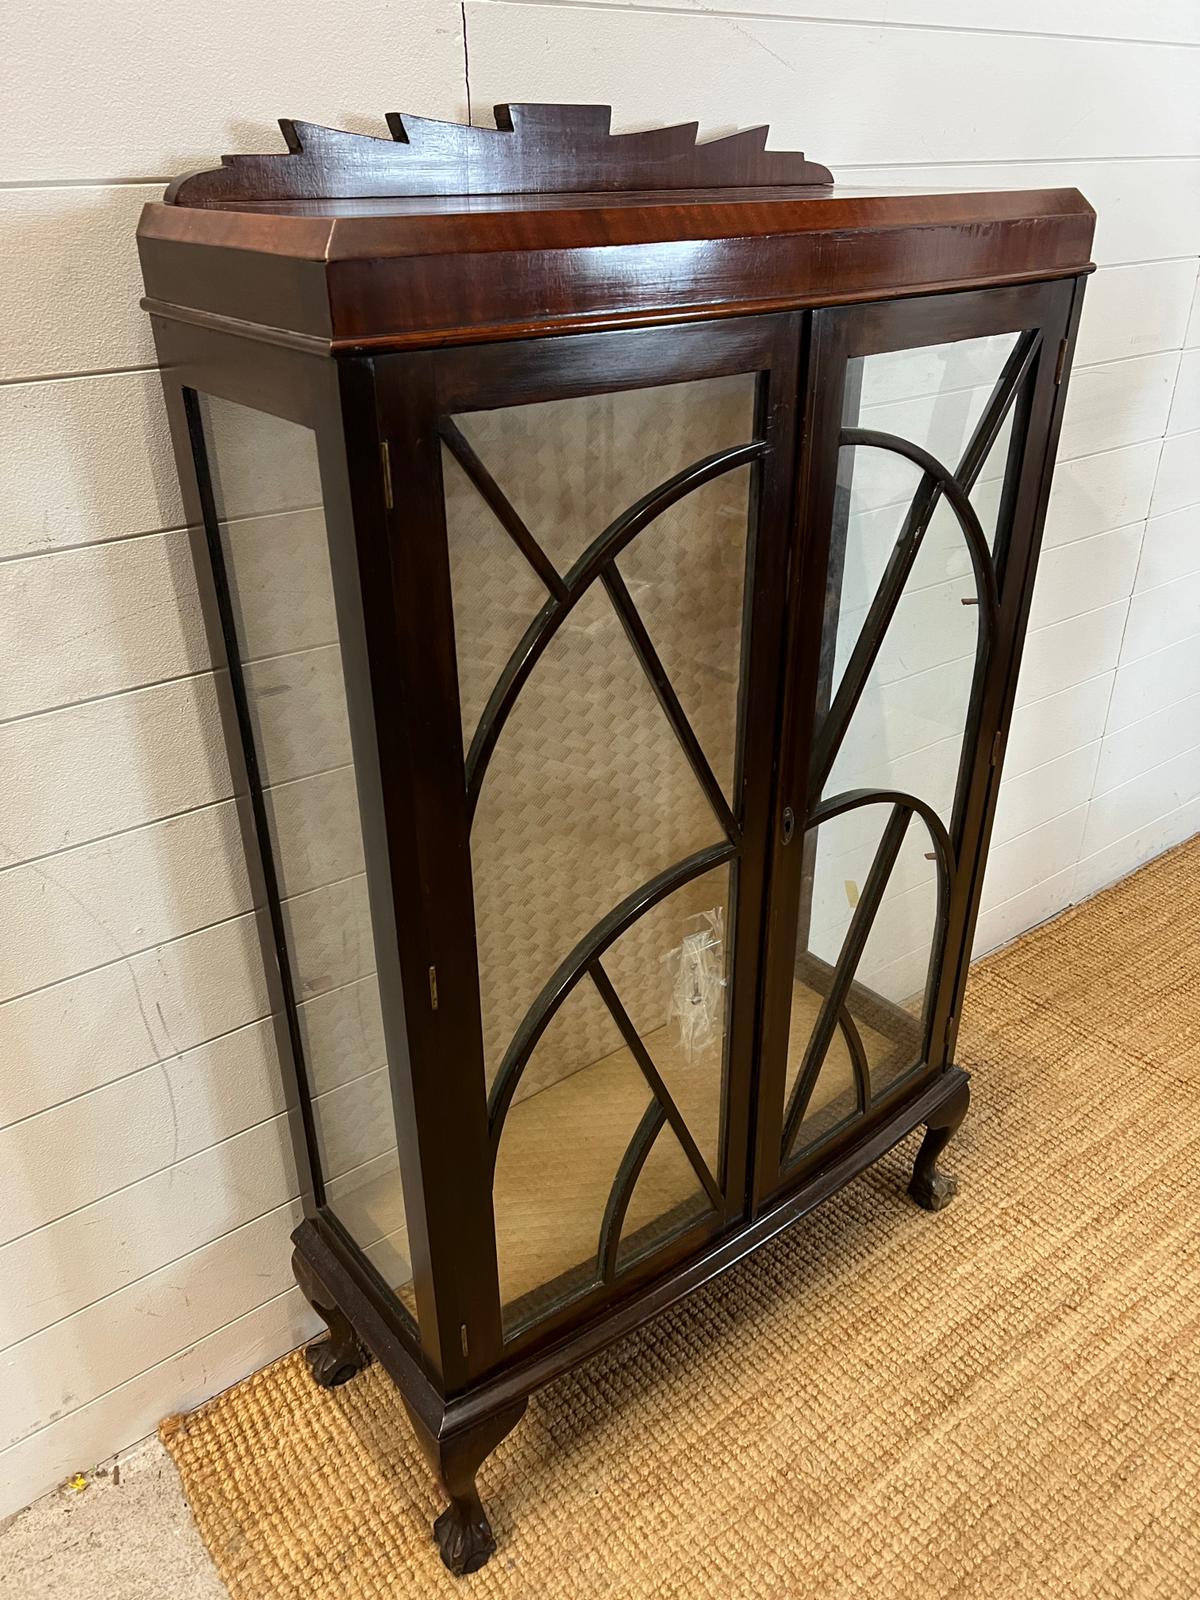 Art Deco style mahogany display cabinet with glass shelves (H128cm W76cm D34cm) - Image 2 of 2